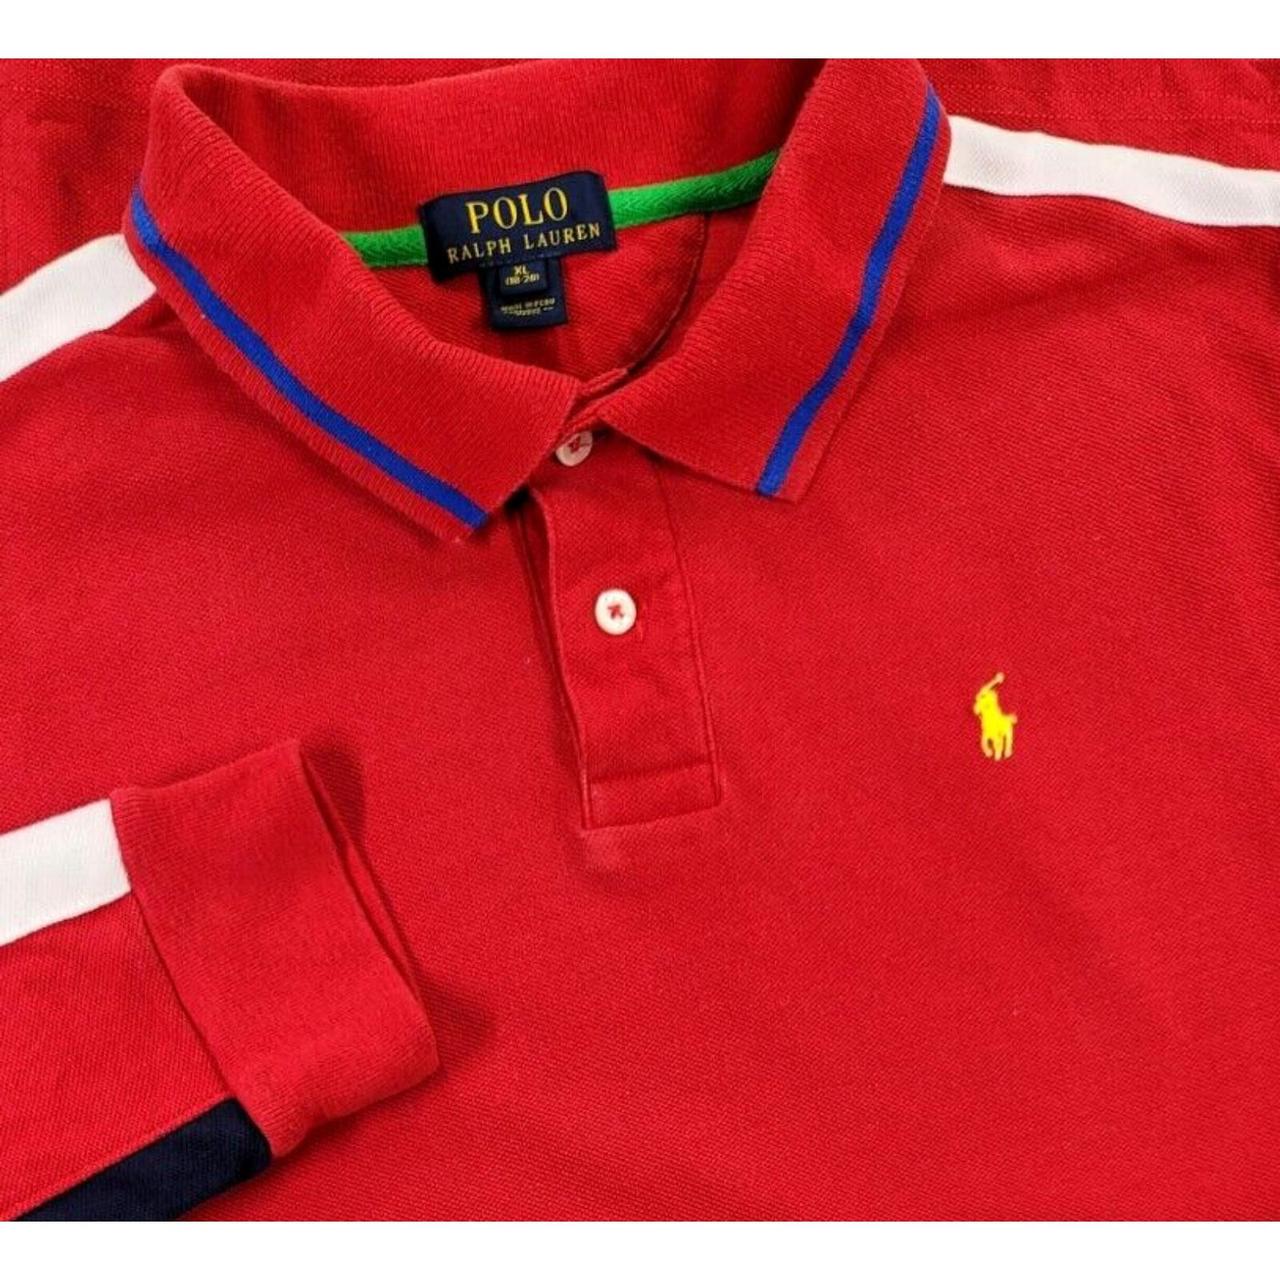 Polo Ralph Lauren Men's Blue and Red Polo-shirts | Depop